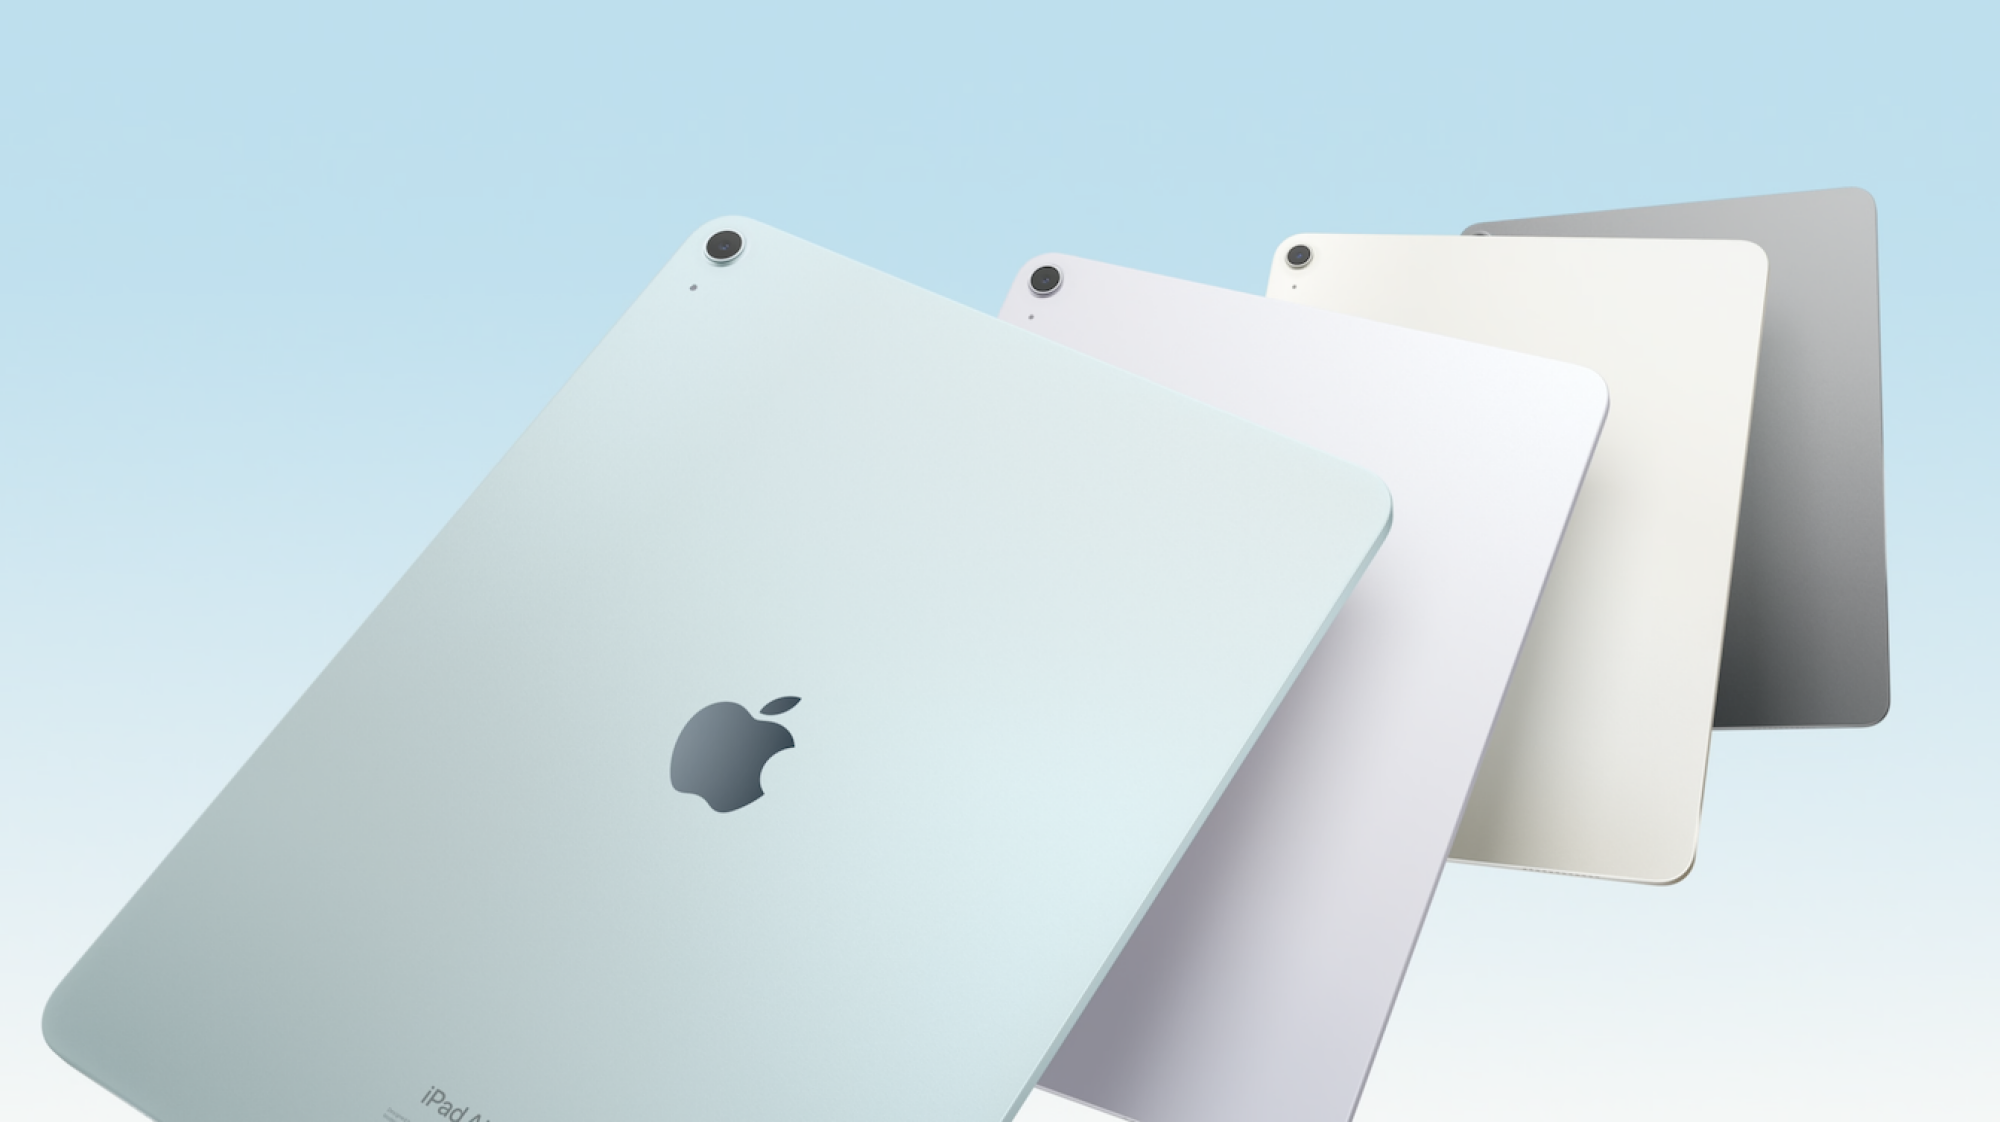 New iPad Airs in different colors